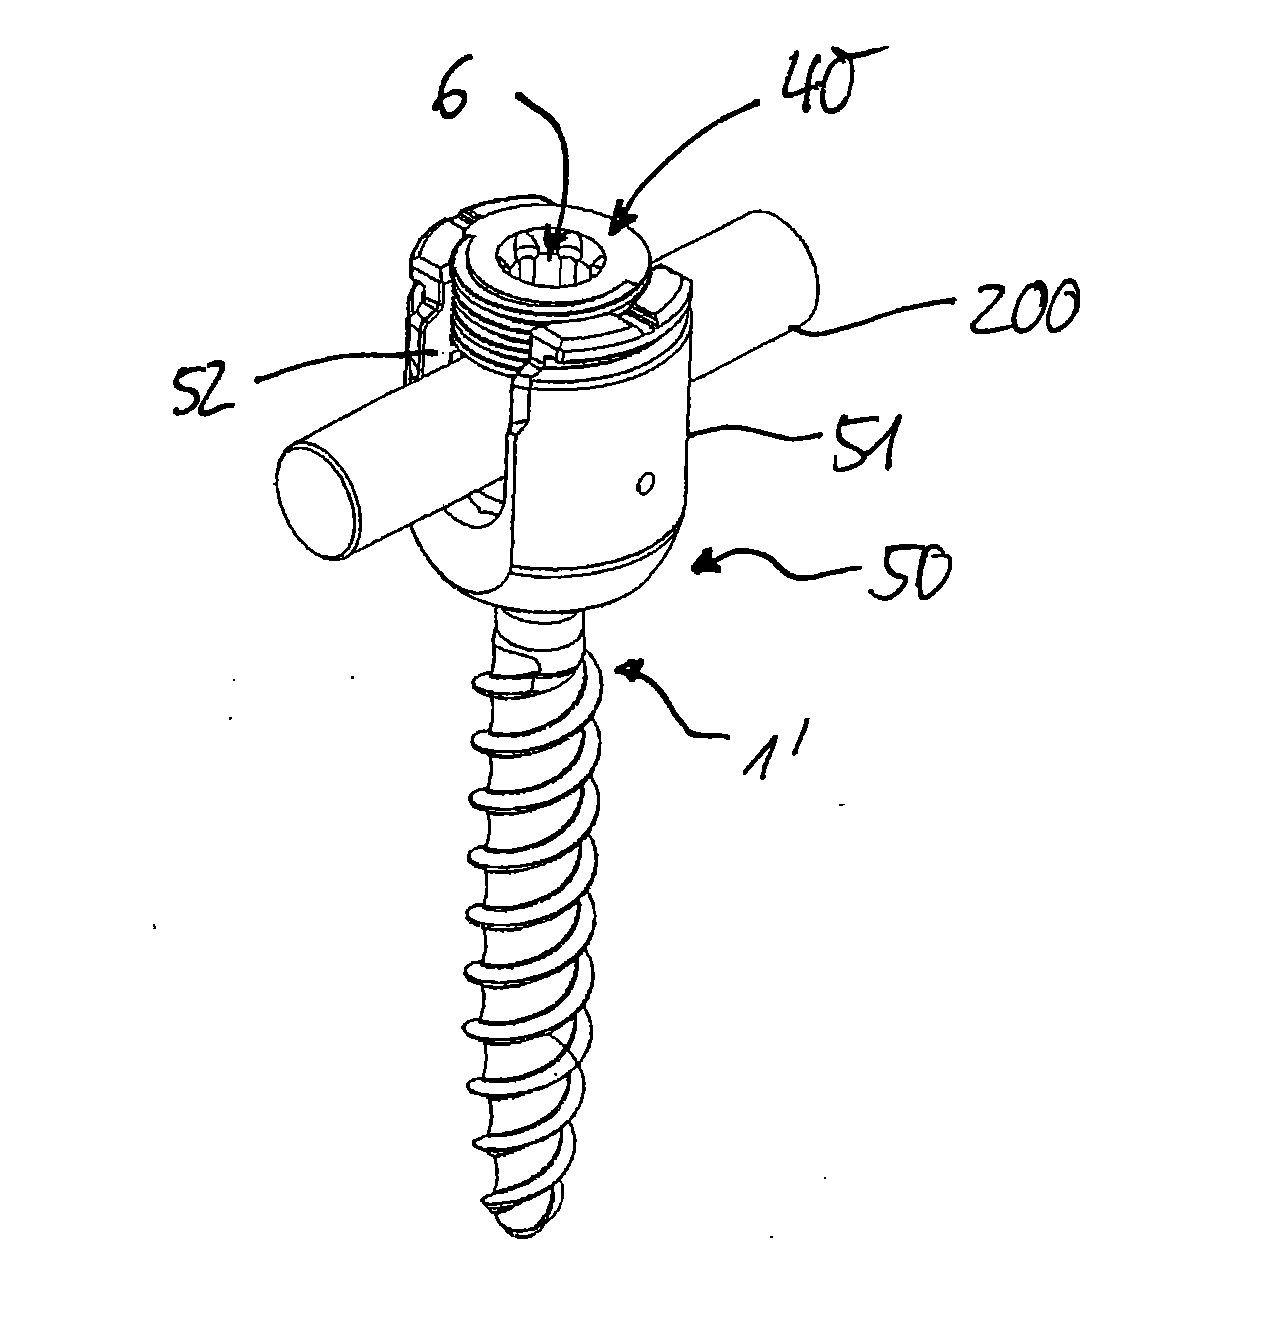 Screw element for use in spinal, orthopedic or trauma surgery and a system of such a screw element and a screw driver adapted thereto